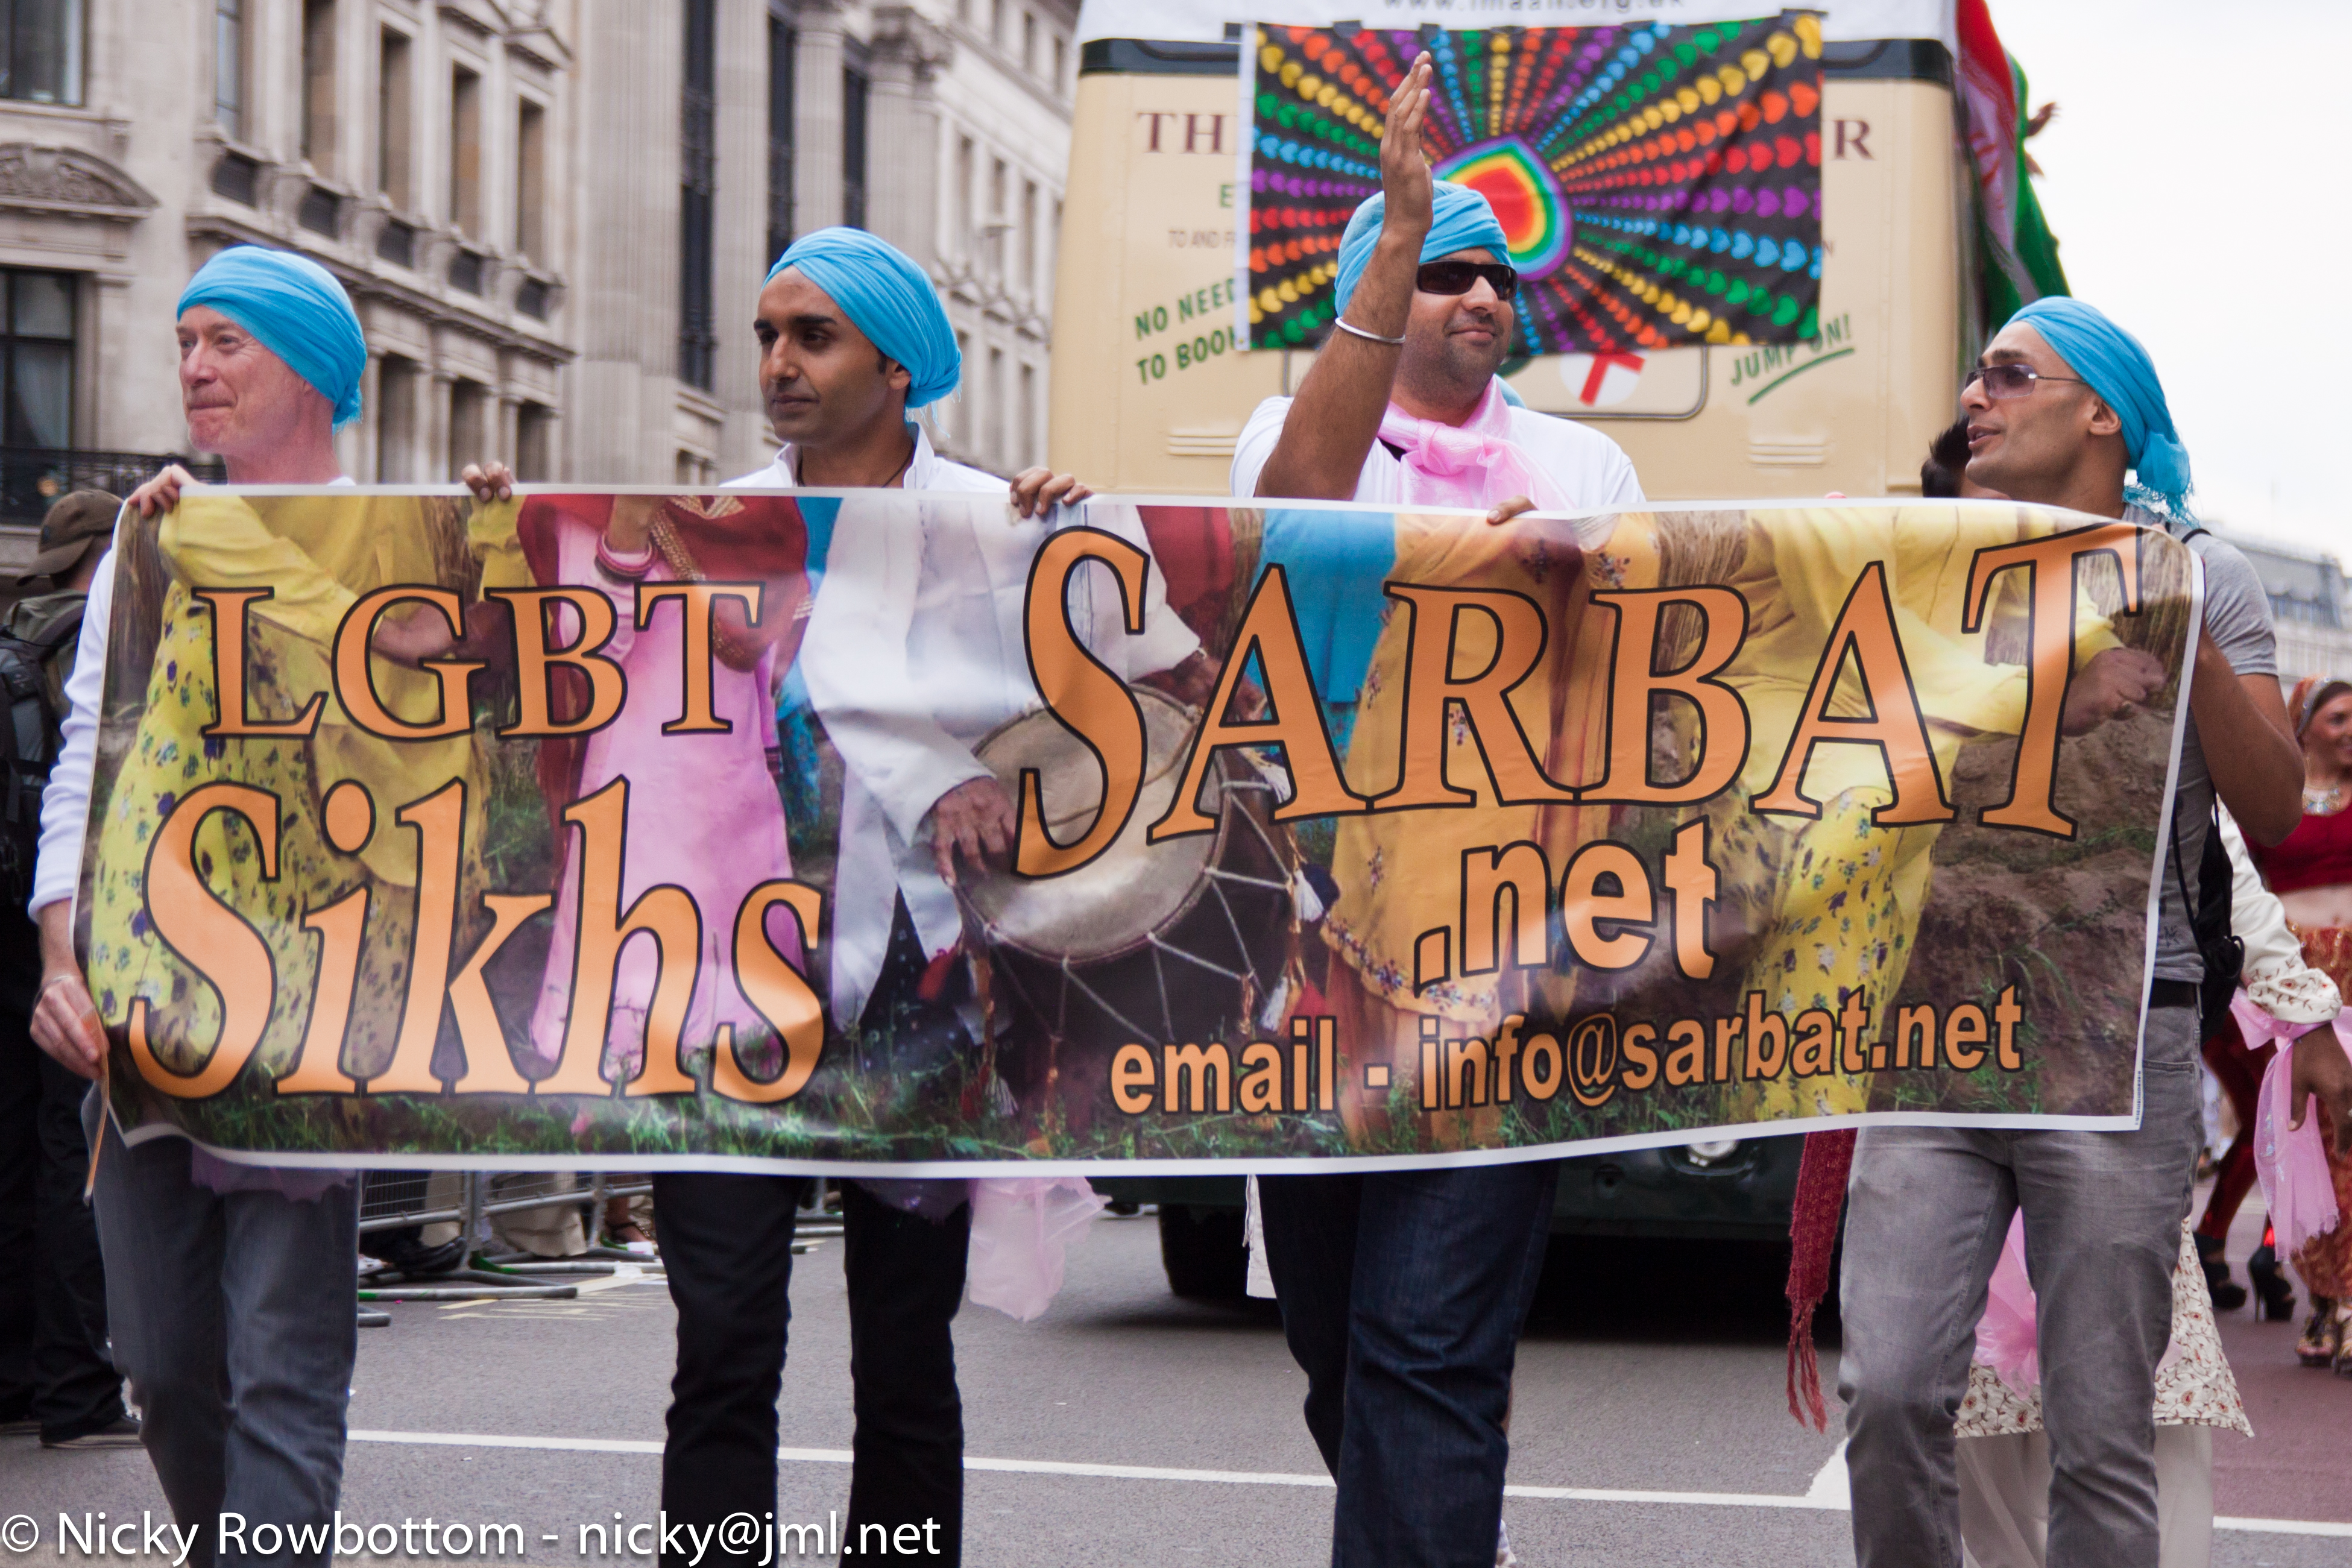 Sikhism and sexual orientation